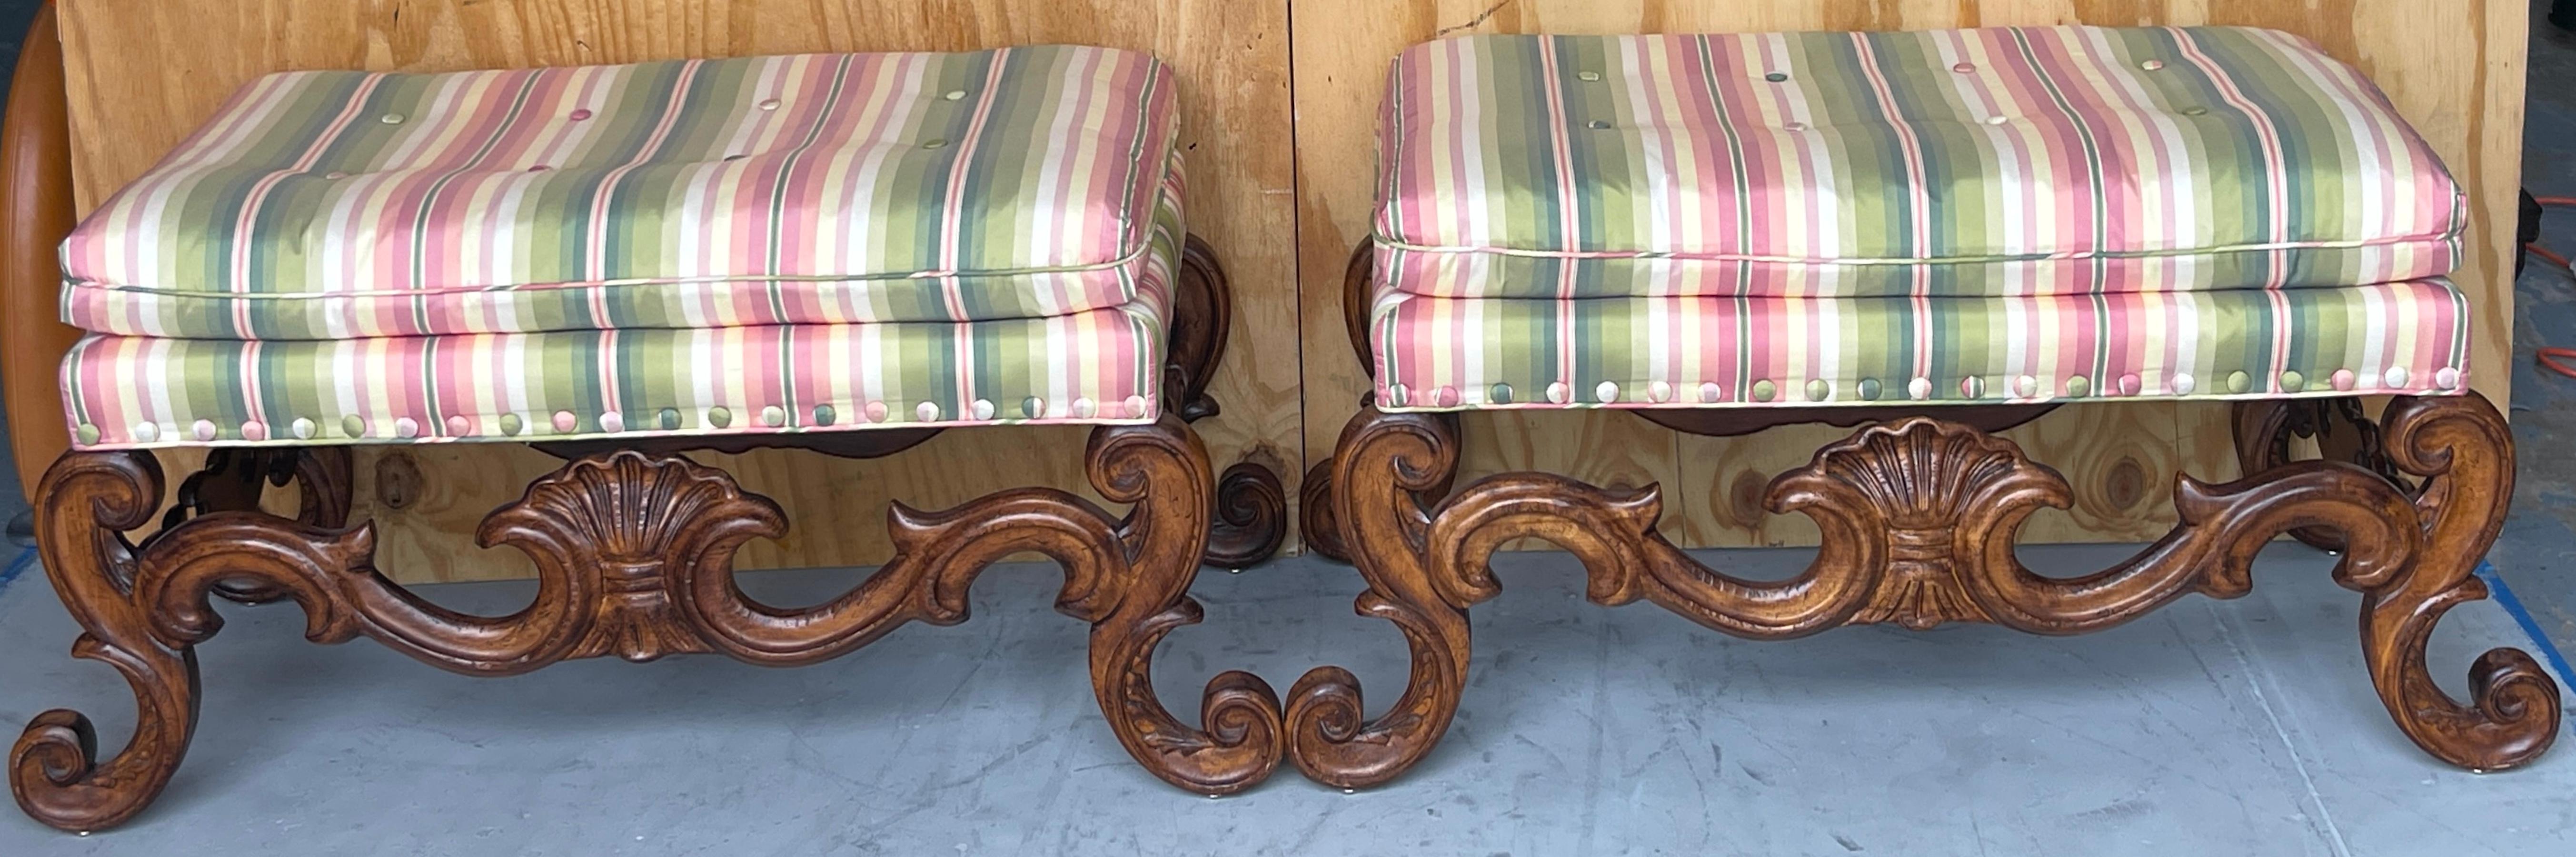 Pair of Carved Walnut Neoclassical Shell Carved Benches, By Baker 

A pair of graceful Carved Walnut Neoclassical Shell Benches made by Baker. These benches boast a substantial  presence, each featuring rectangular frames well carved from walnut in